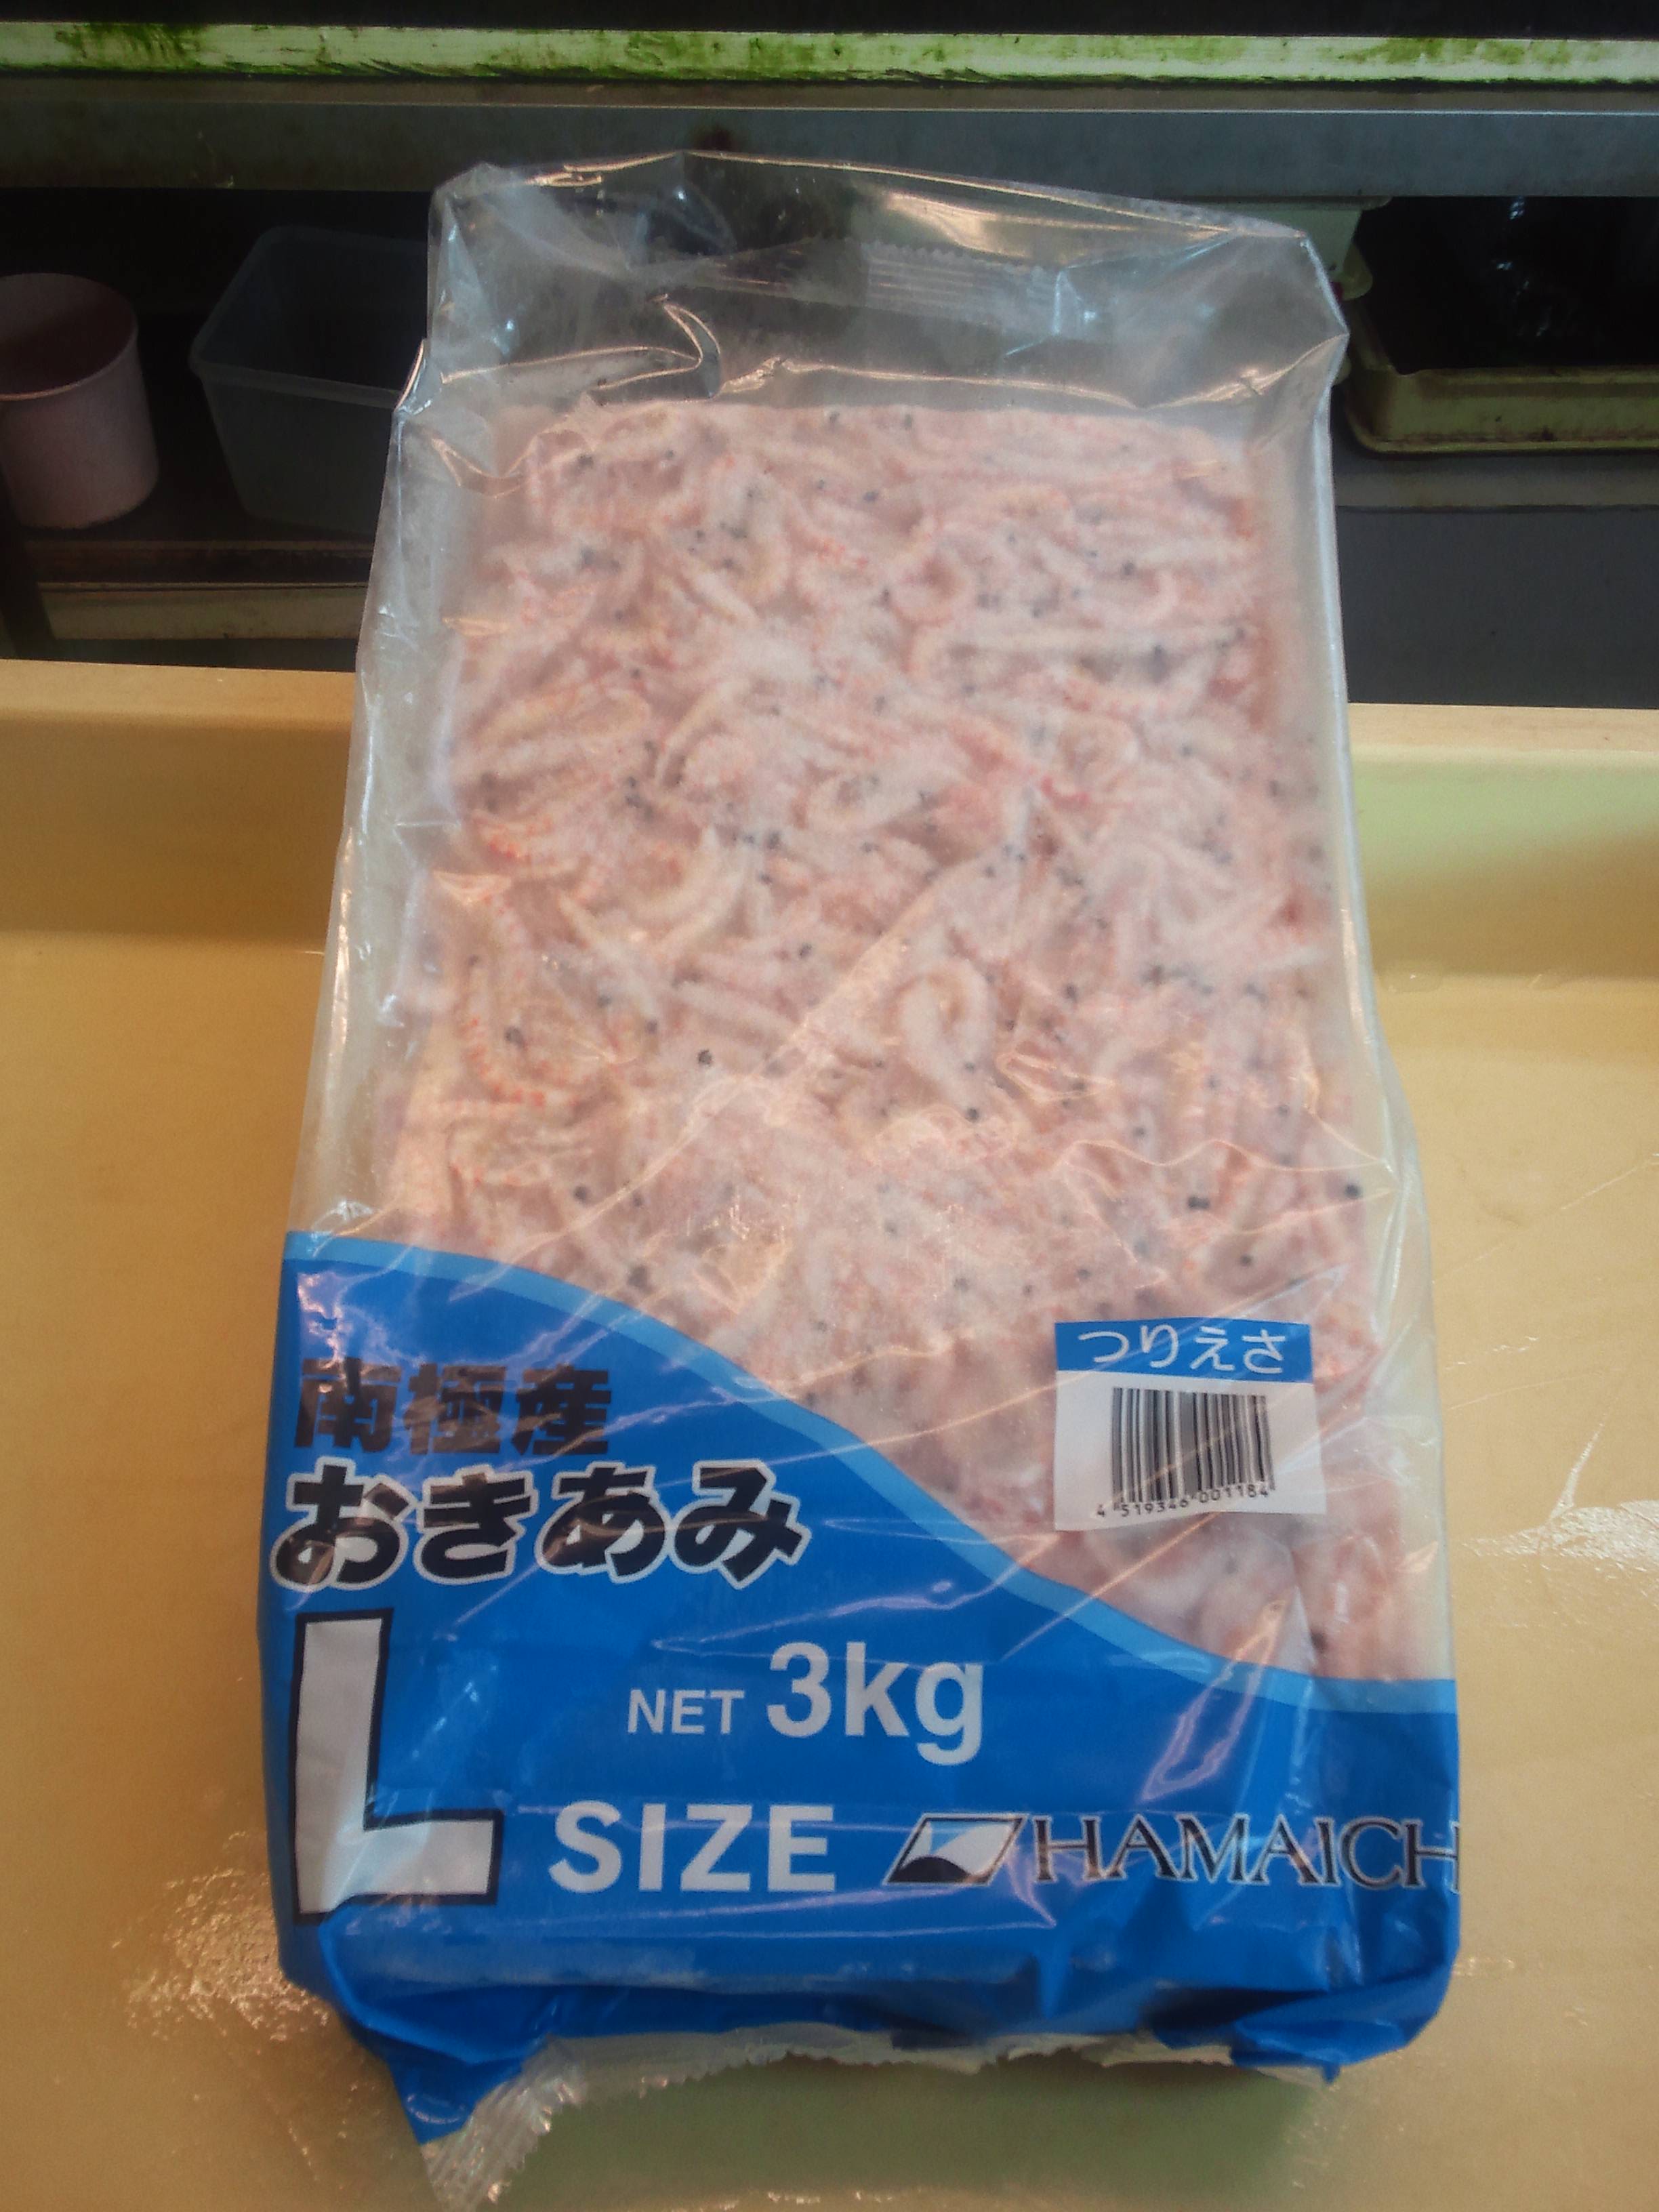 A~3kg@LTCY